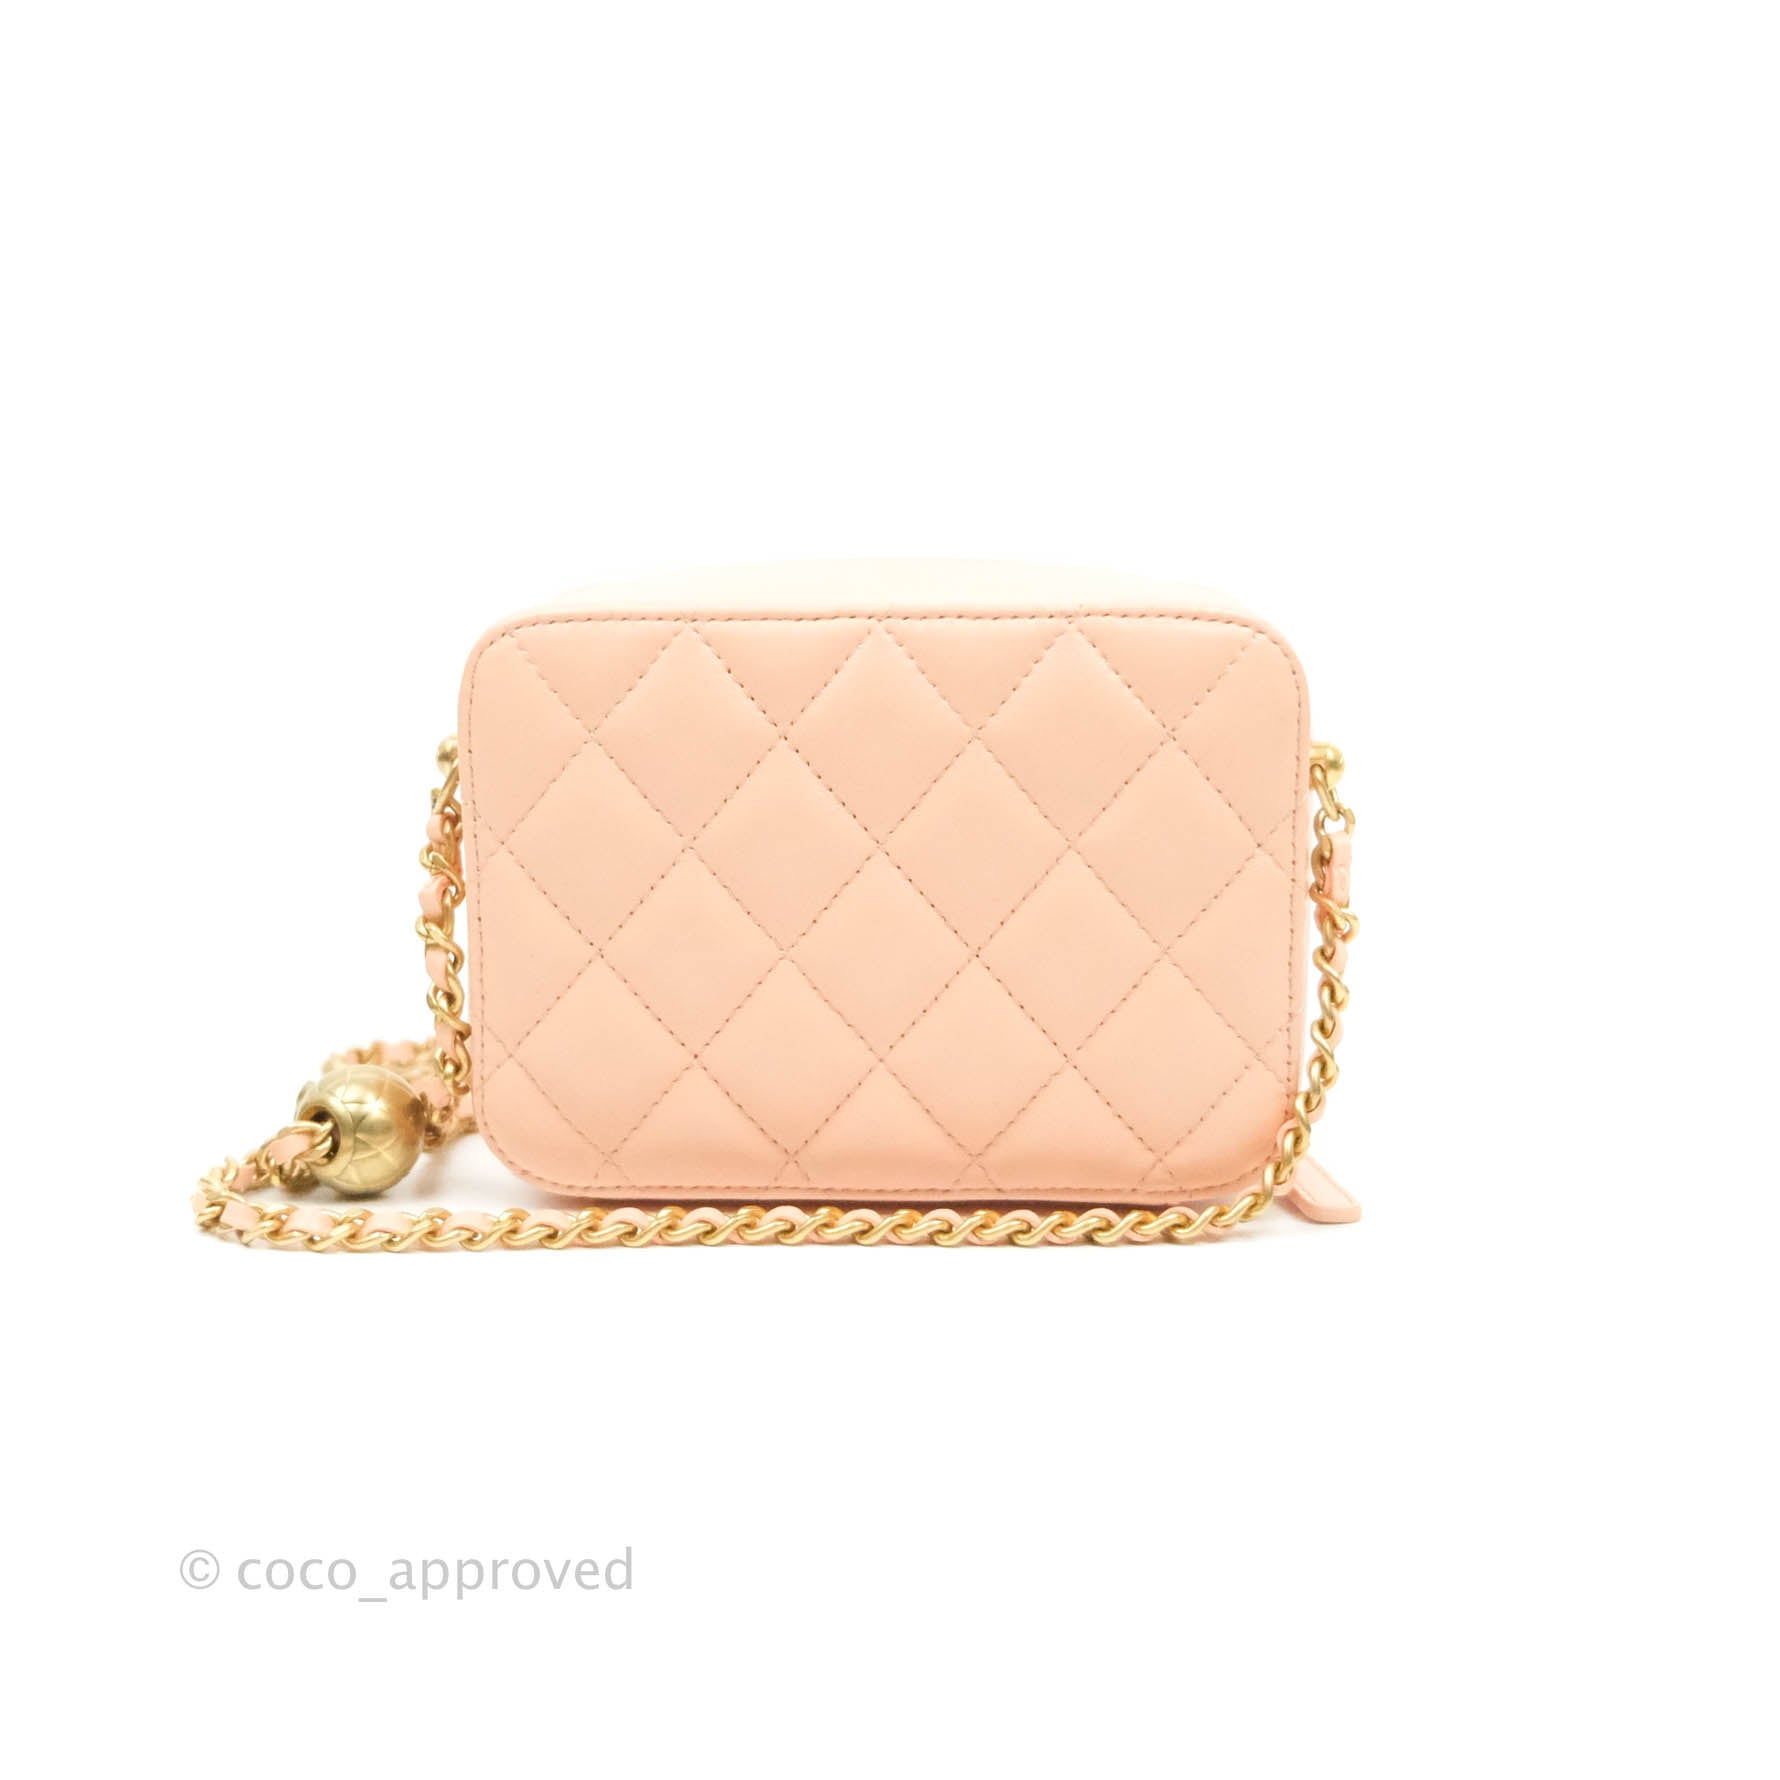 Chanel Mini Pearl Crush Quilted Camera Case Beige Pink Lambskin